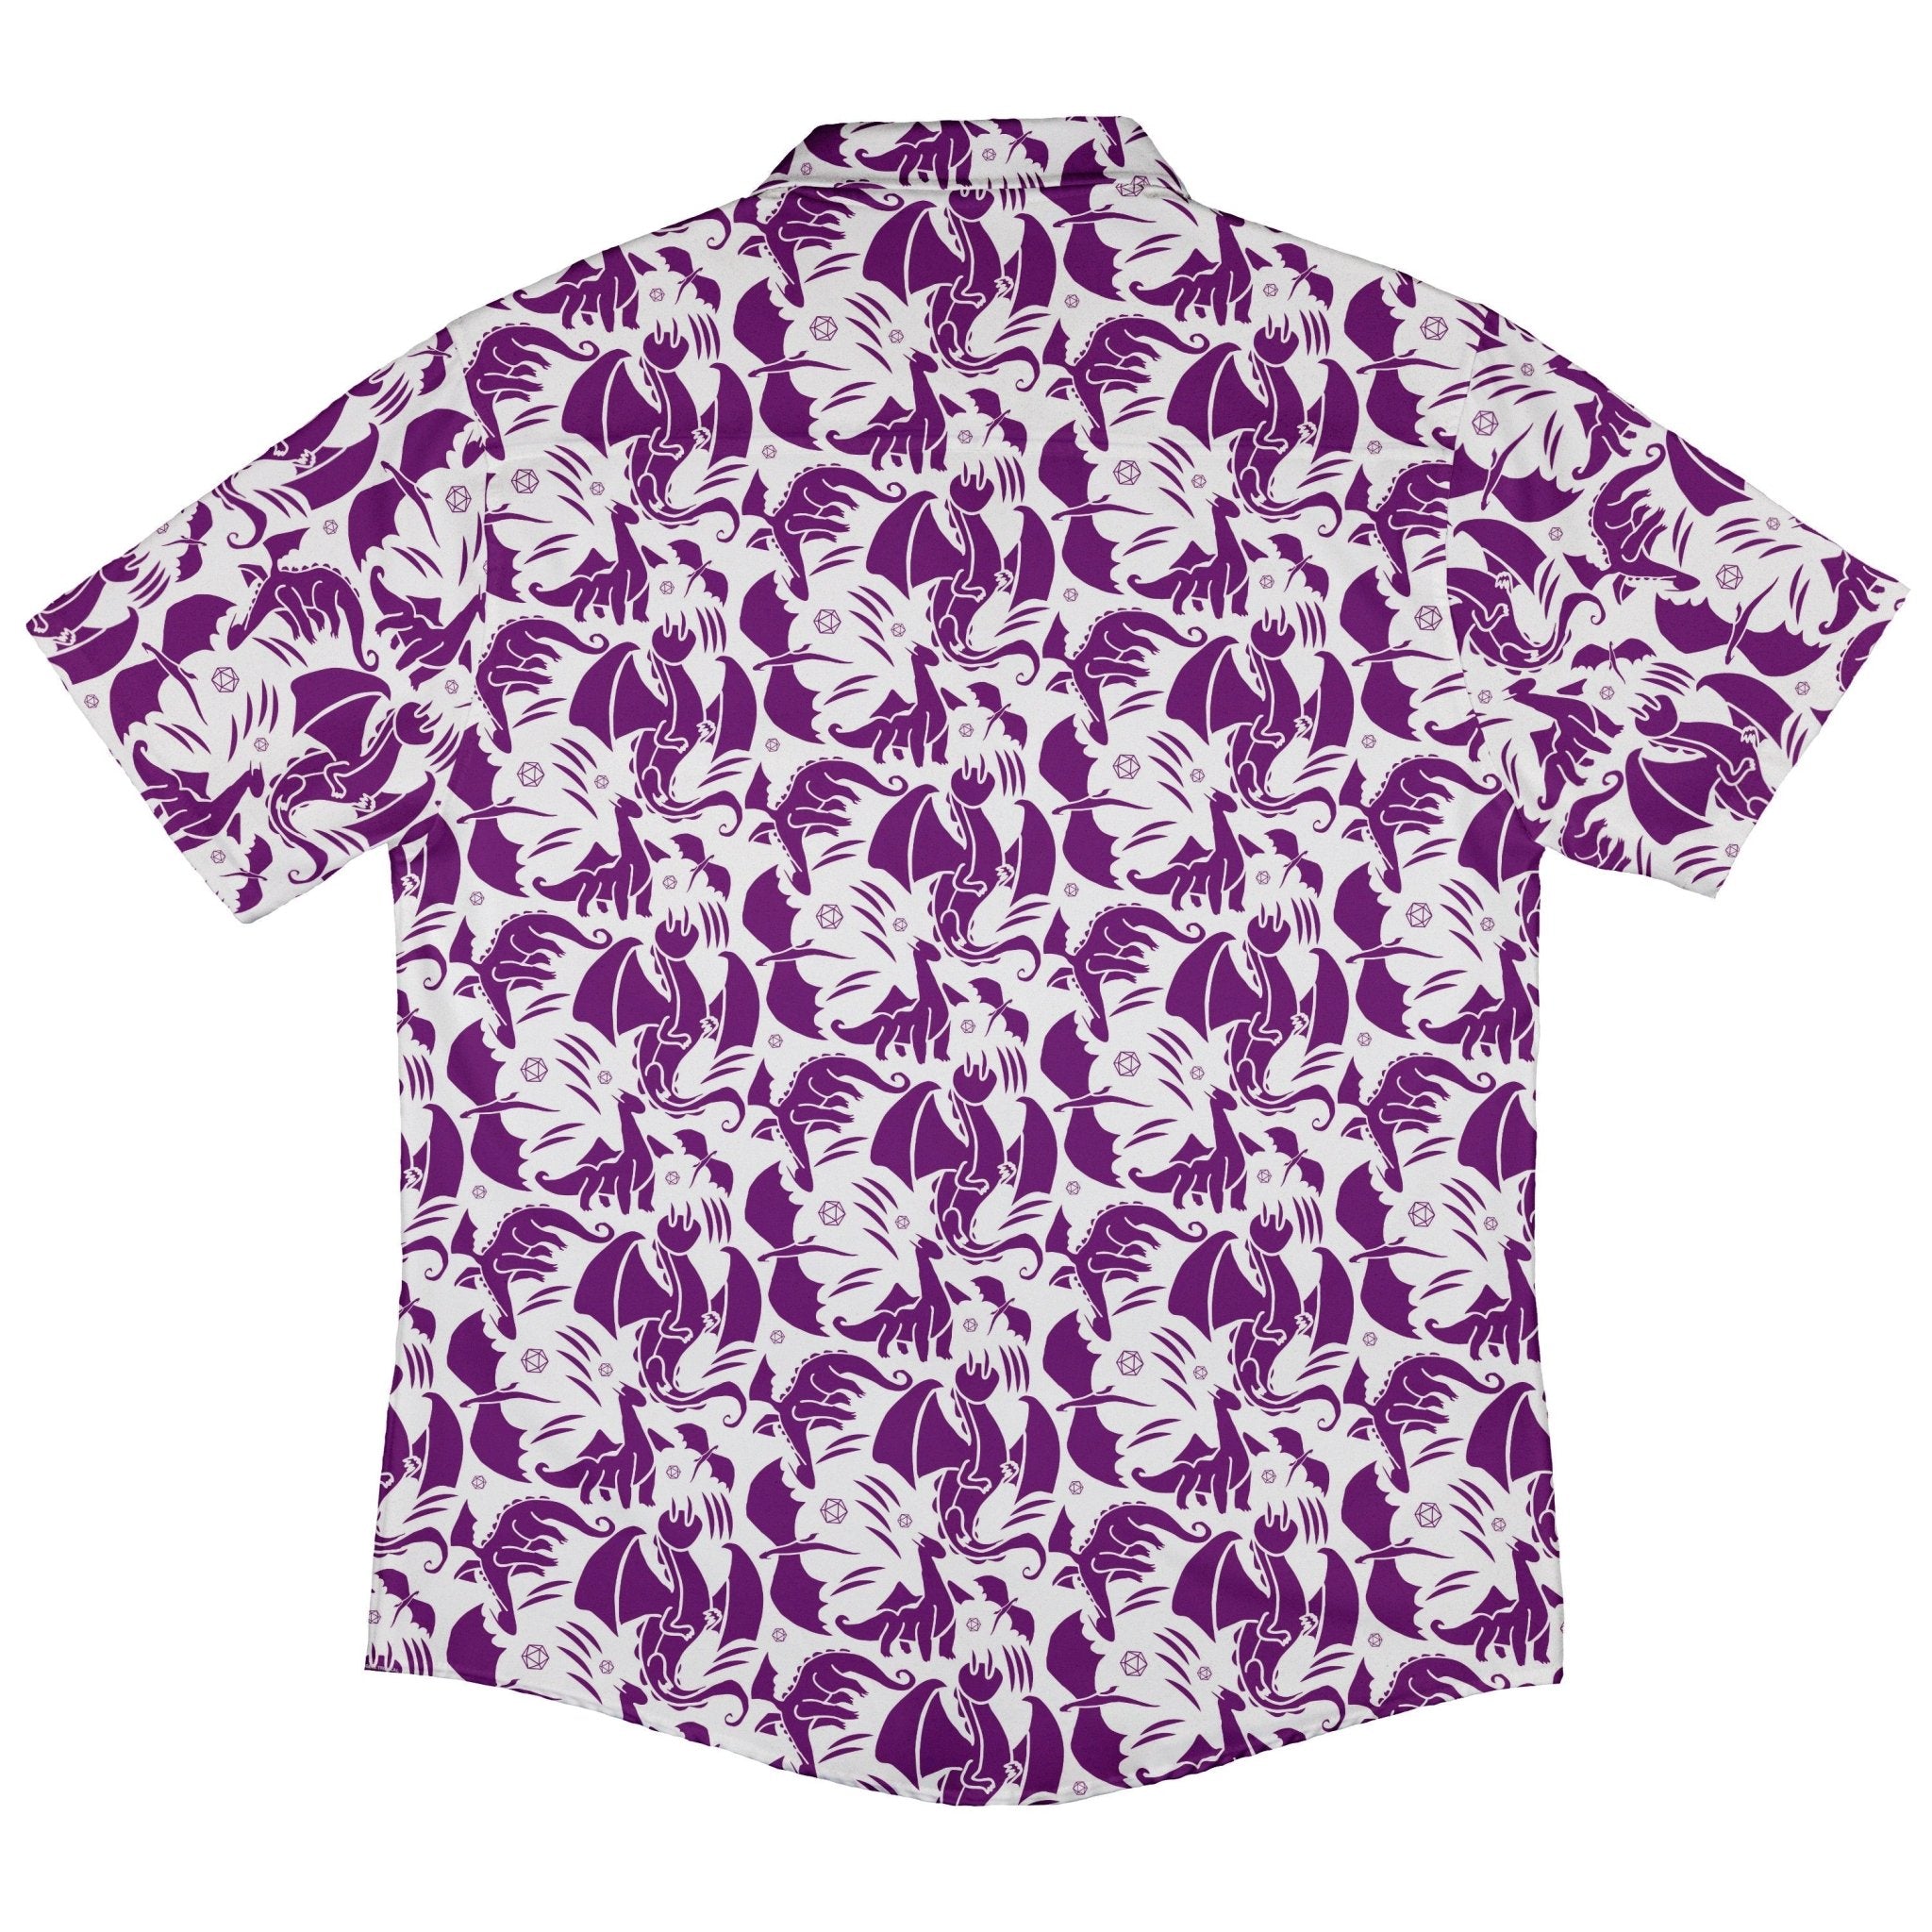 Dnd Purple Dragons Button Up Shirt - adult sizing - Design by Heather Davenport - dnd & rpg print